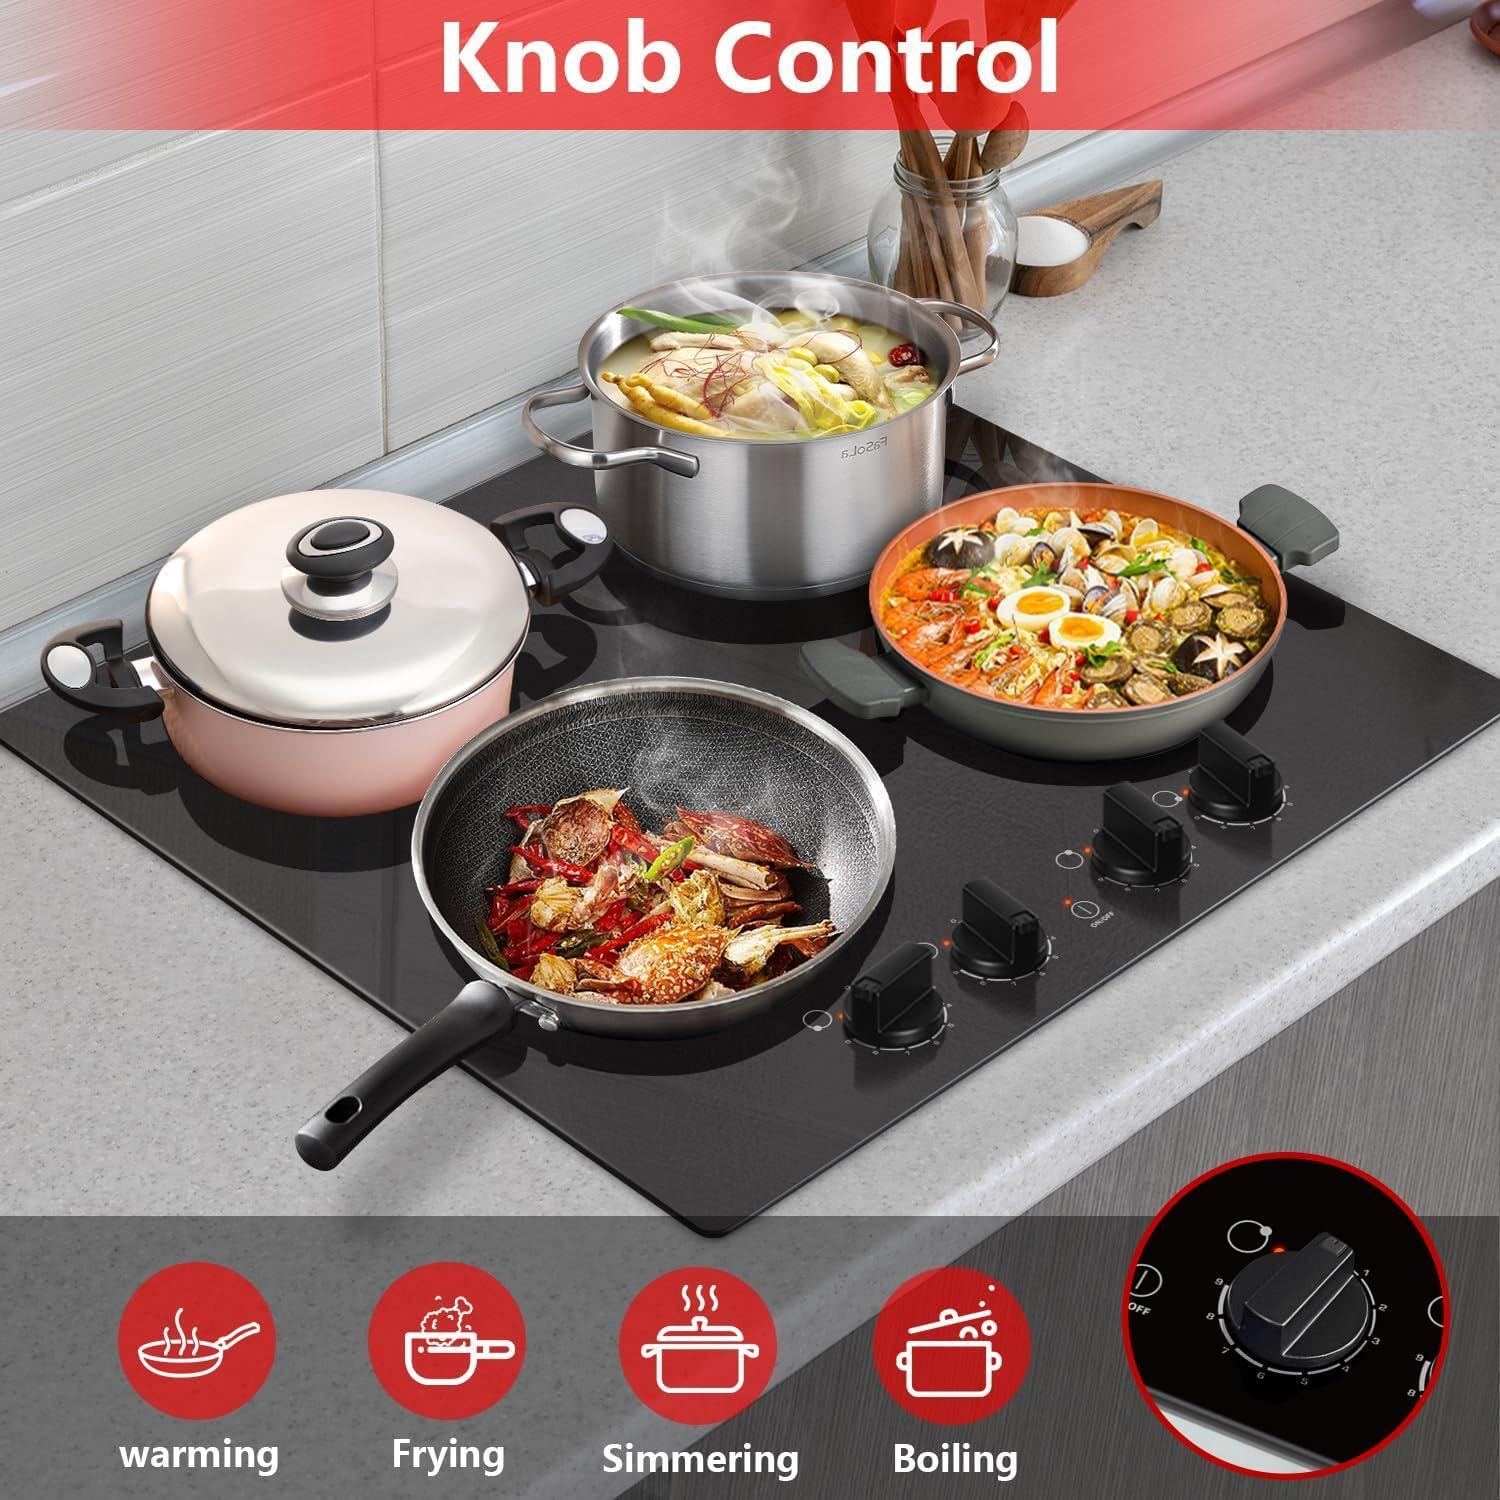 24 inch induction cooktop